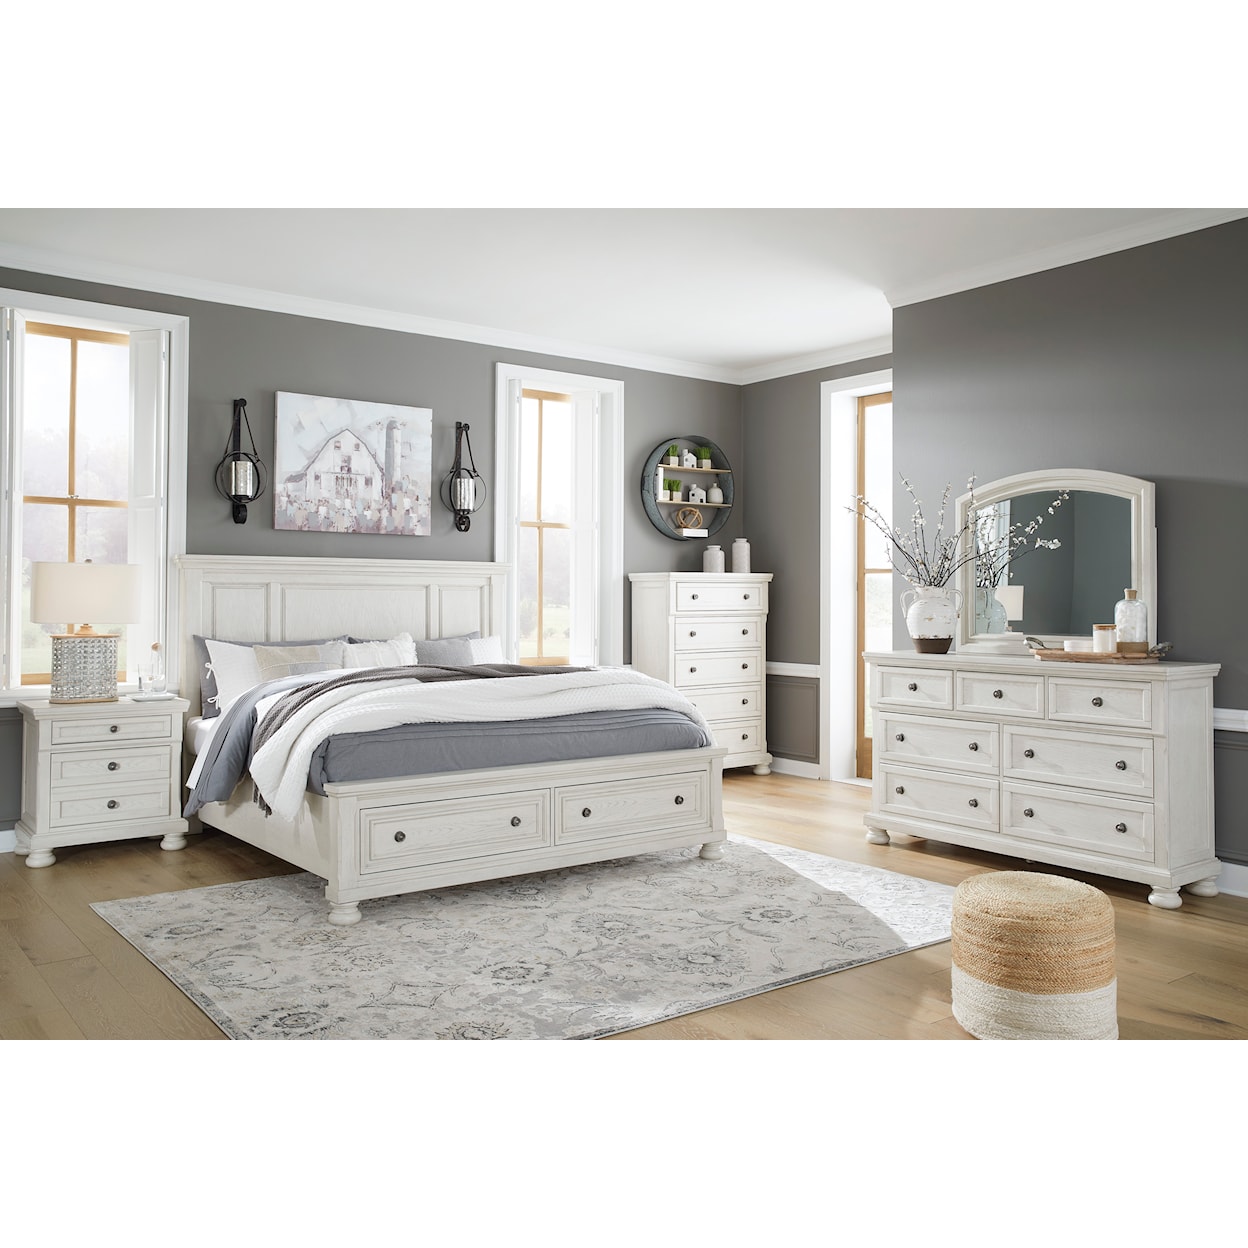 Signature Robbinsdale California King Panel Bed with Storage